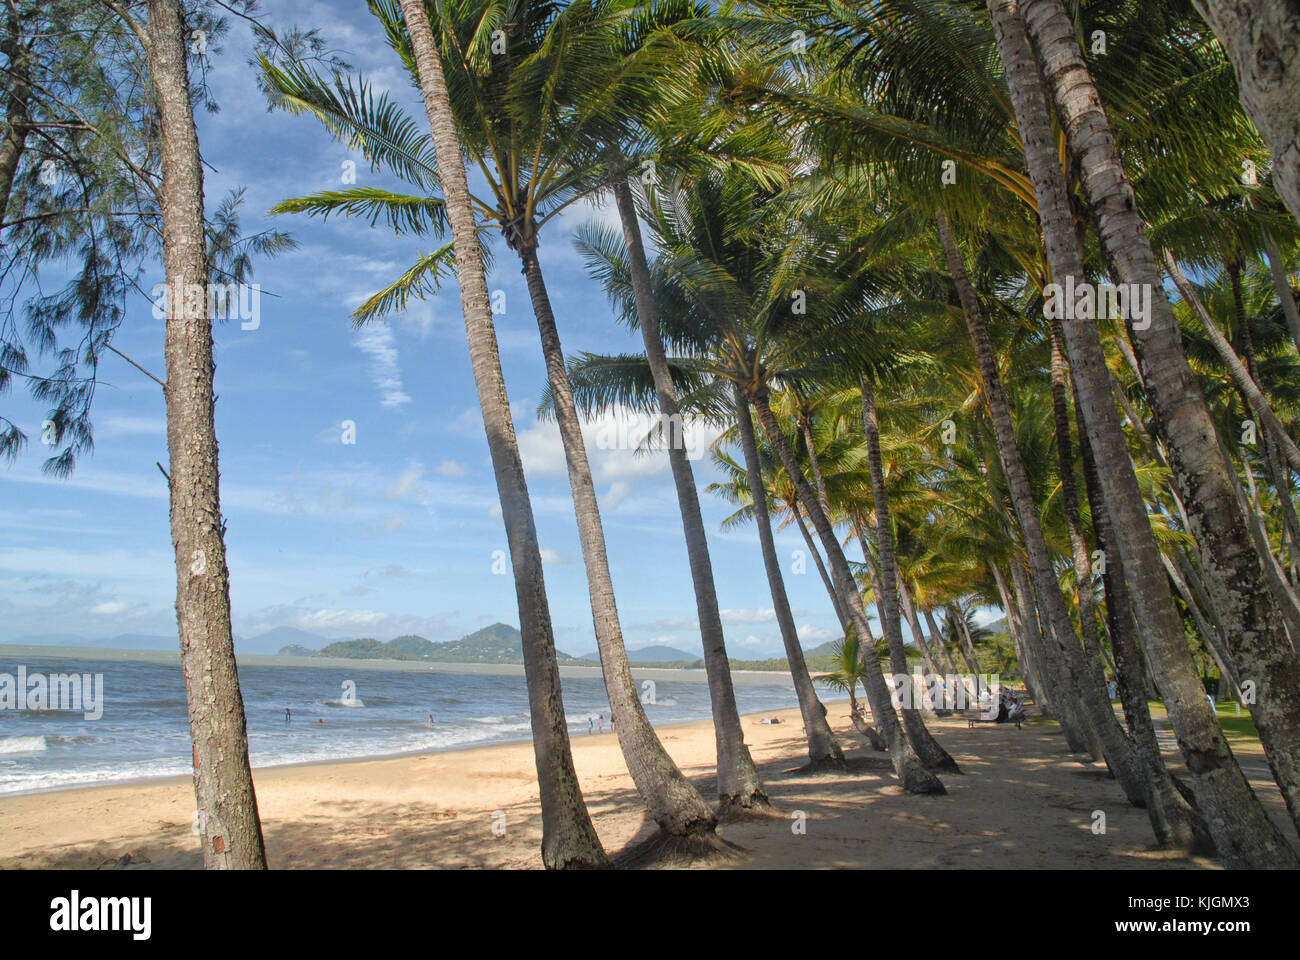 Palm Cove Australia High Resolution Stock Photography and Images - Alamy